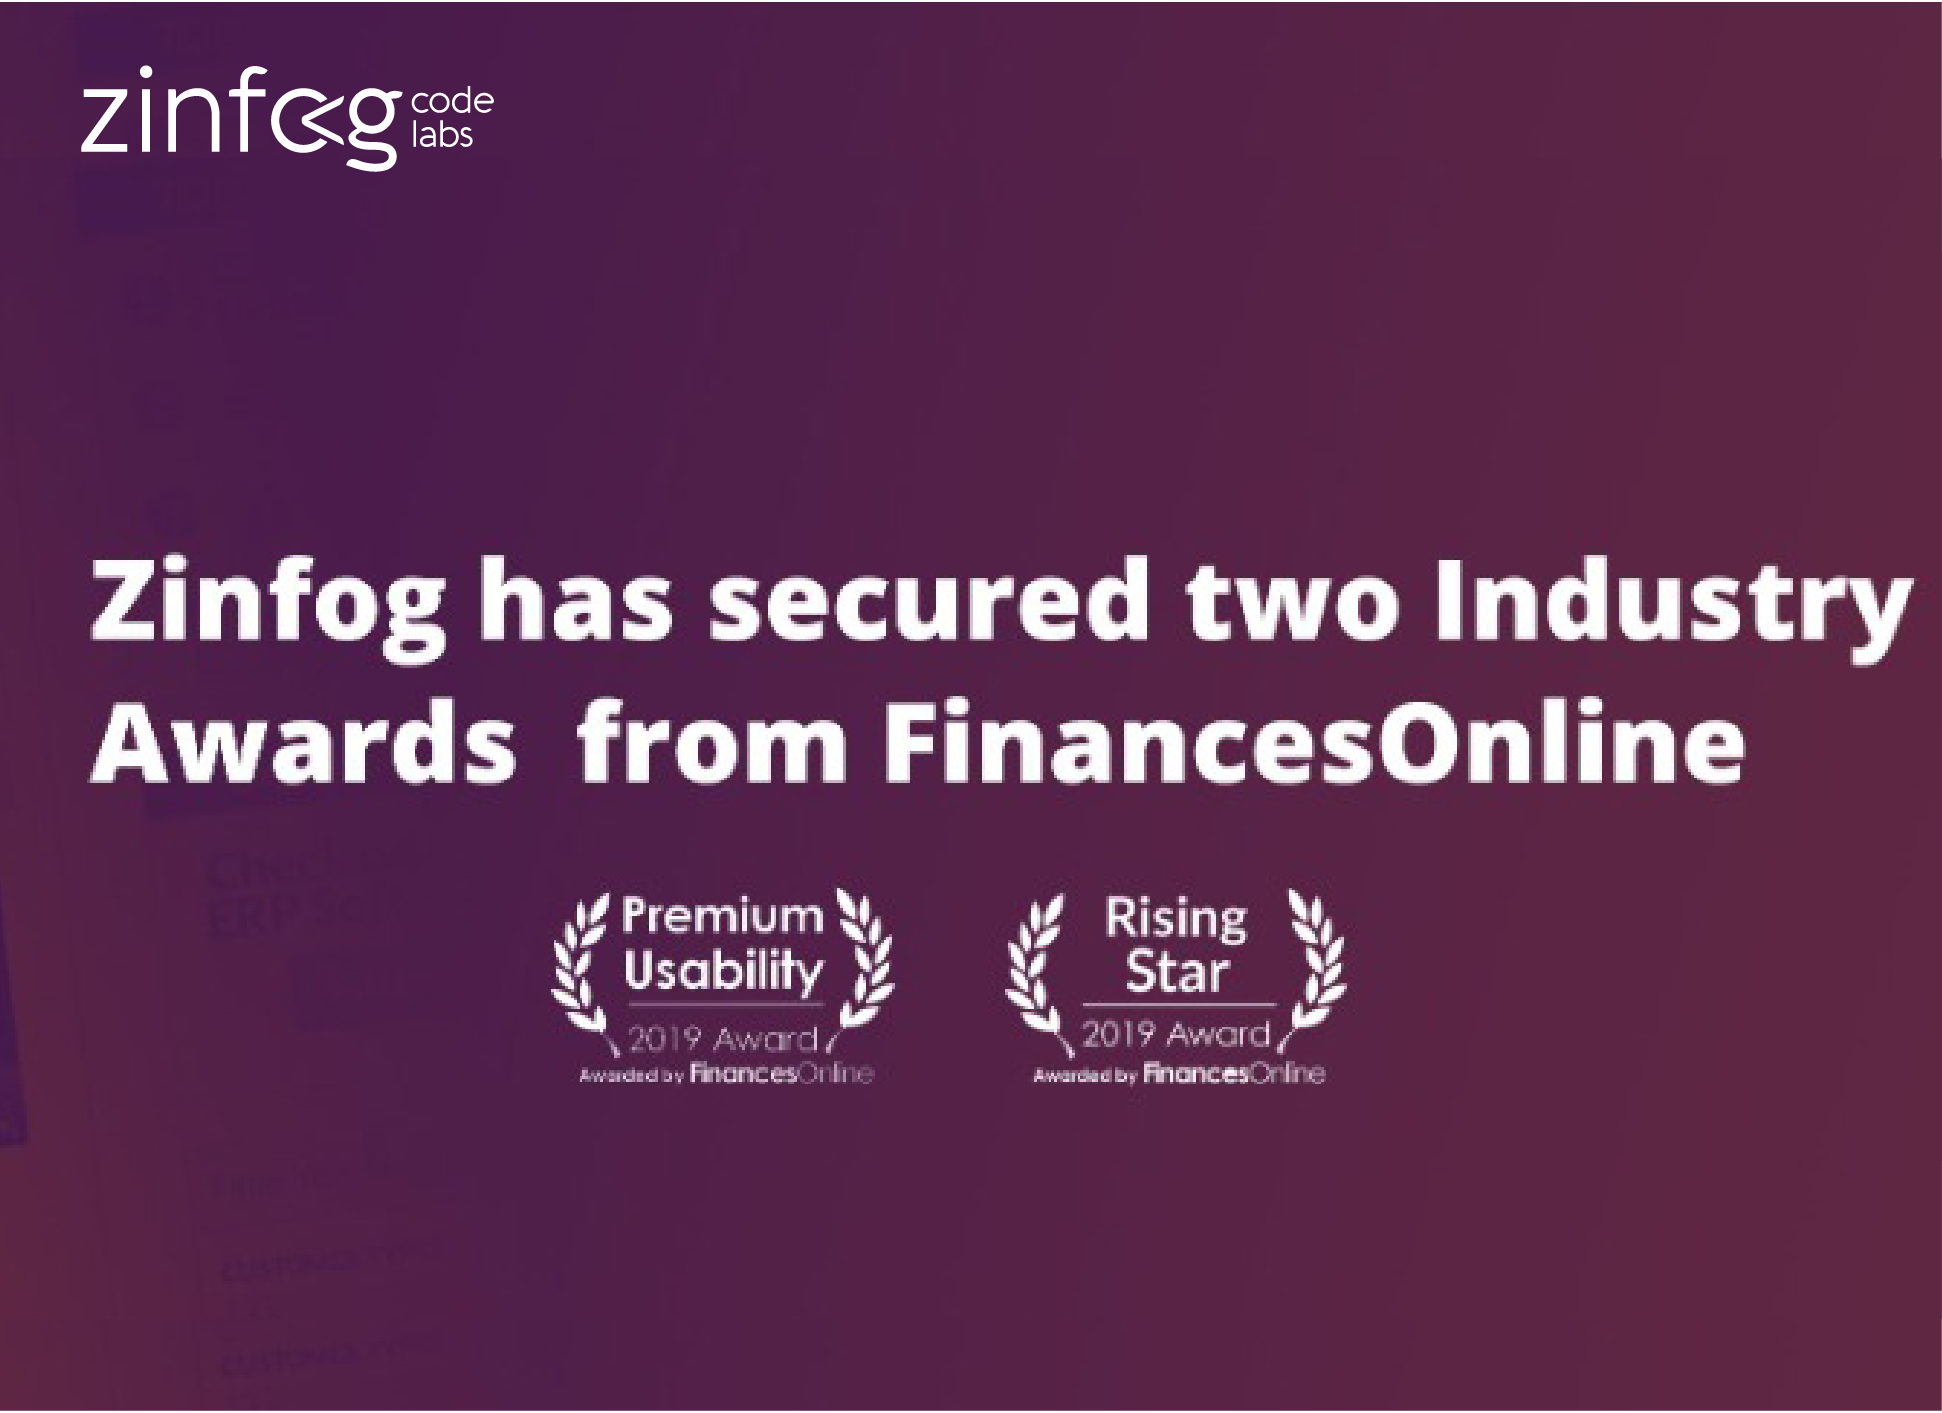 zinfog_has_secured_two_industry_awards_from_financeonline.html